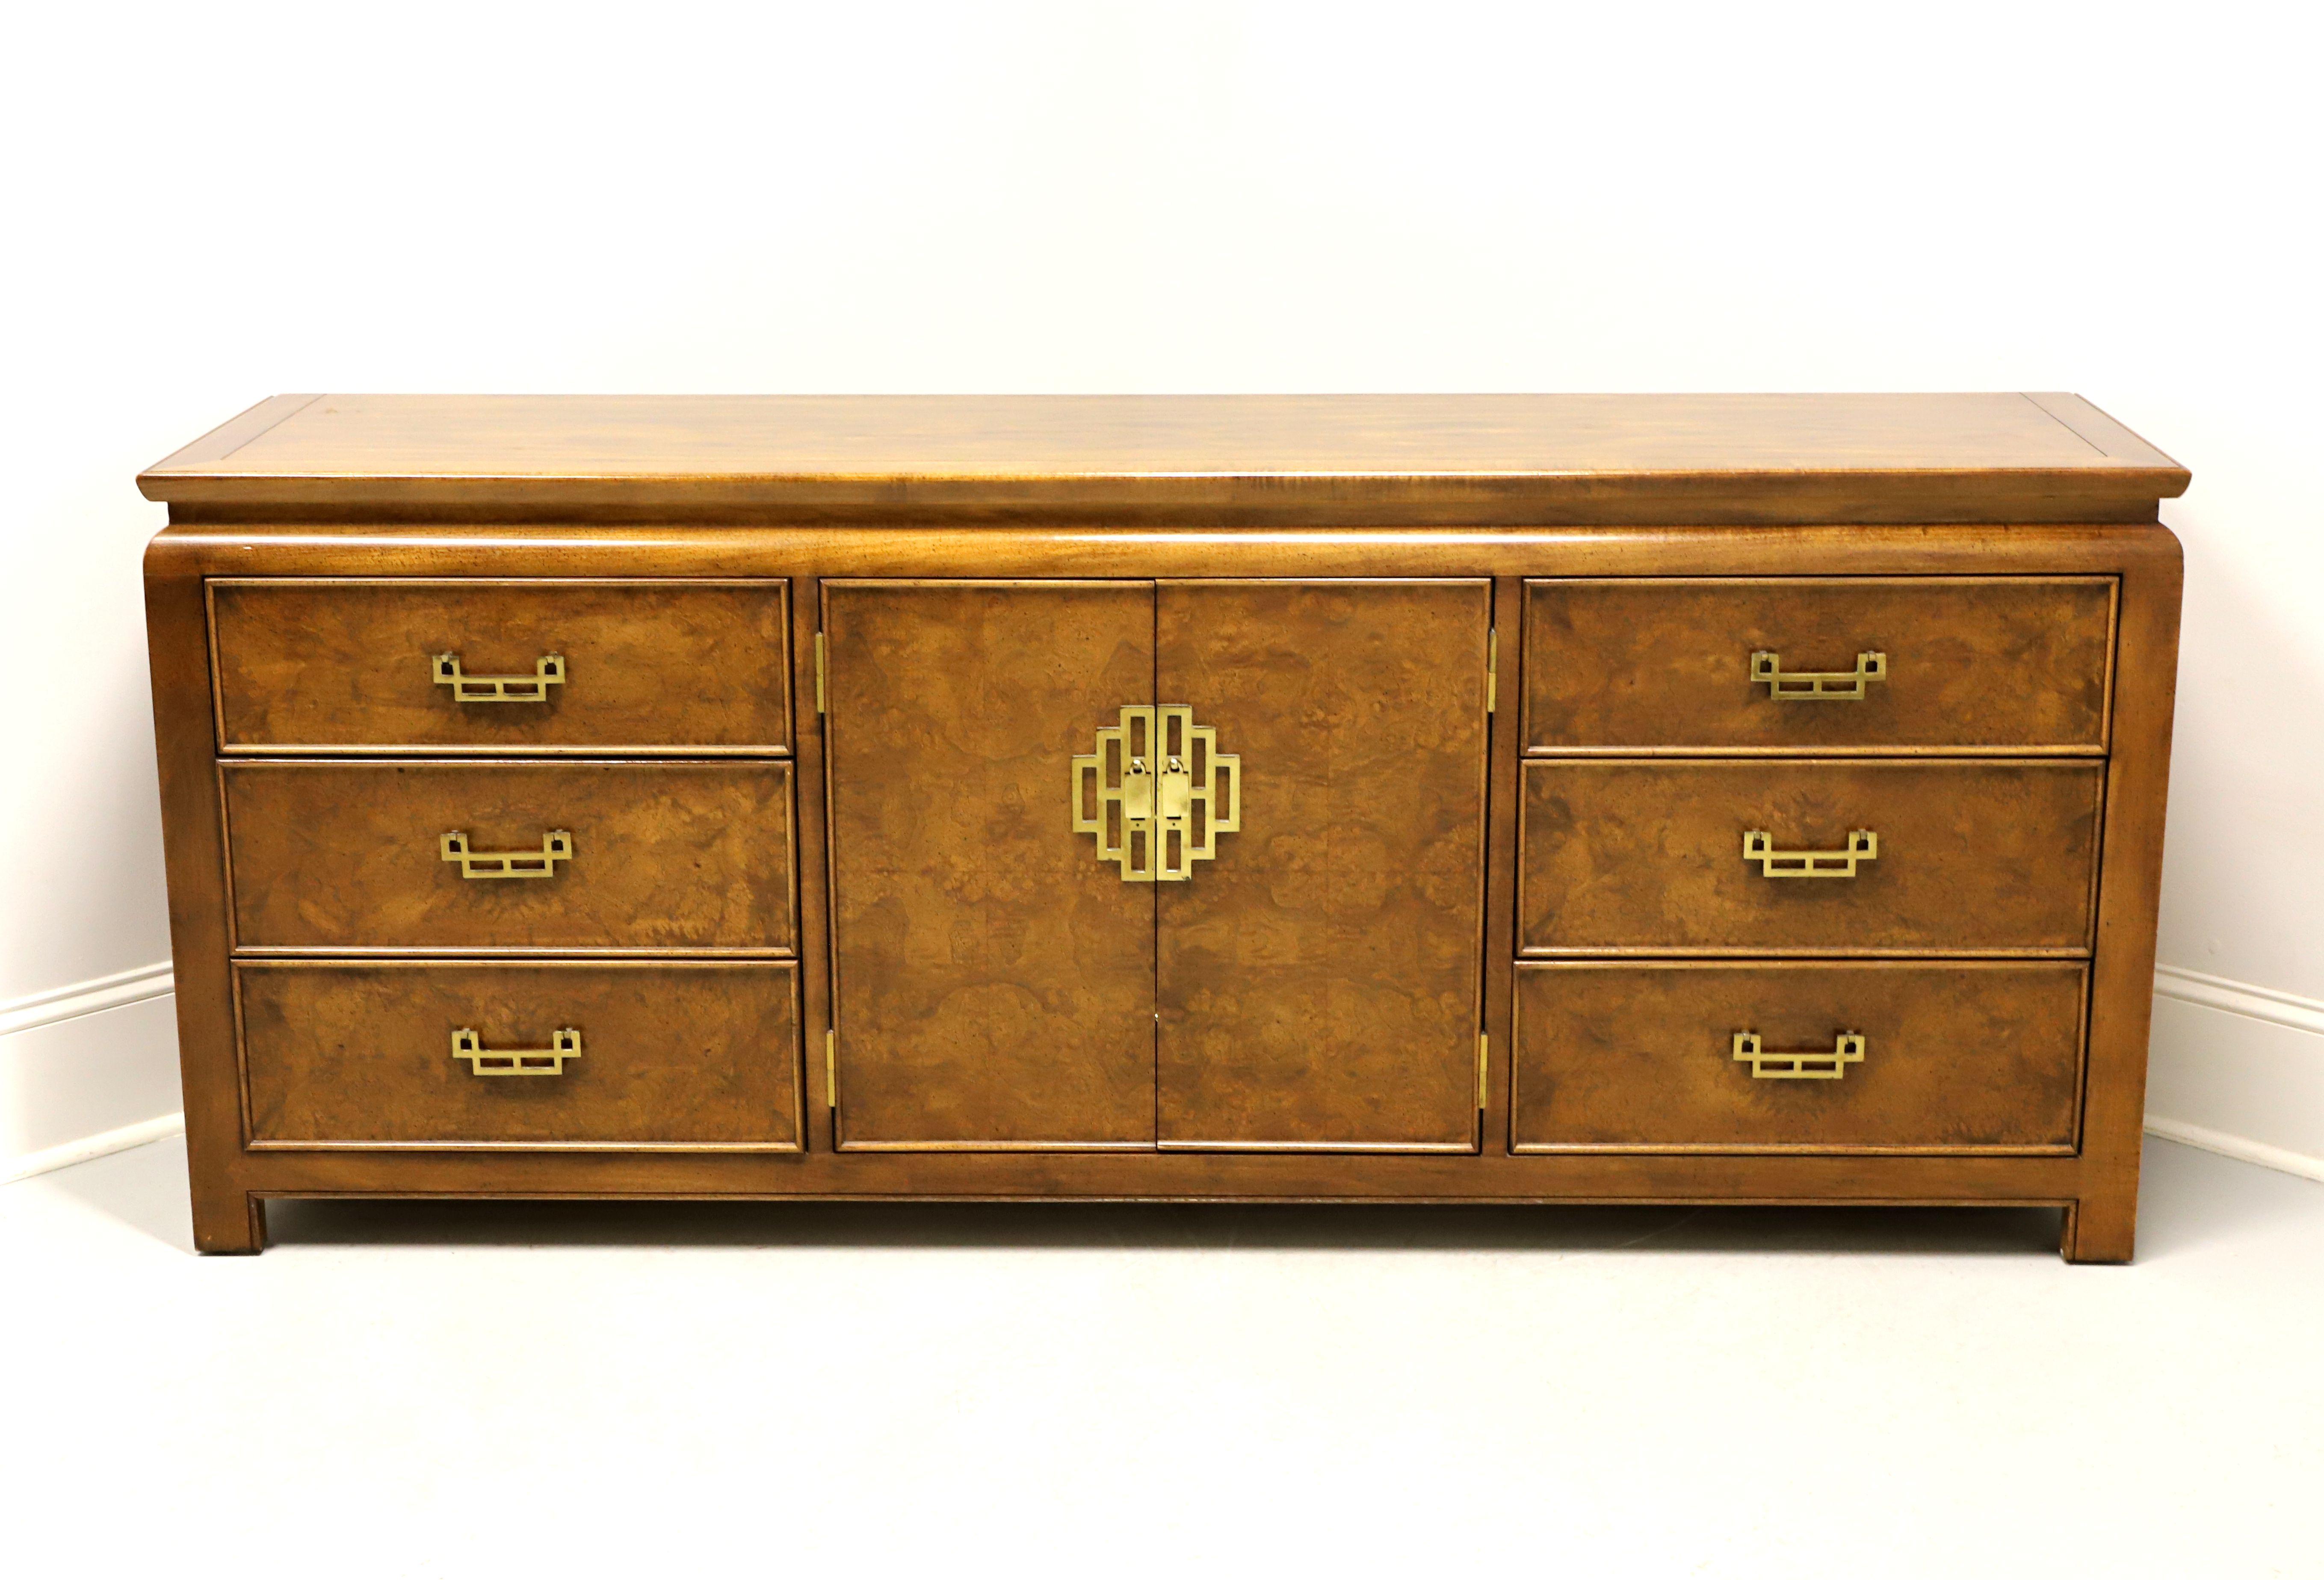 An Asian Style triple dresser by top-quality furniture maker Century Furniture, from their 